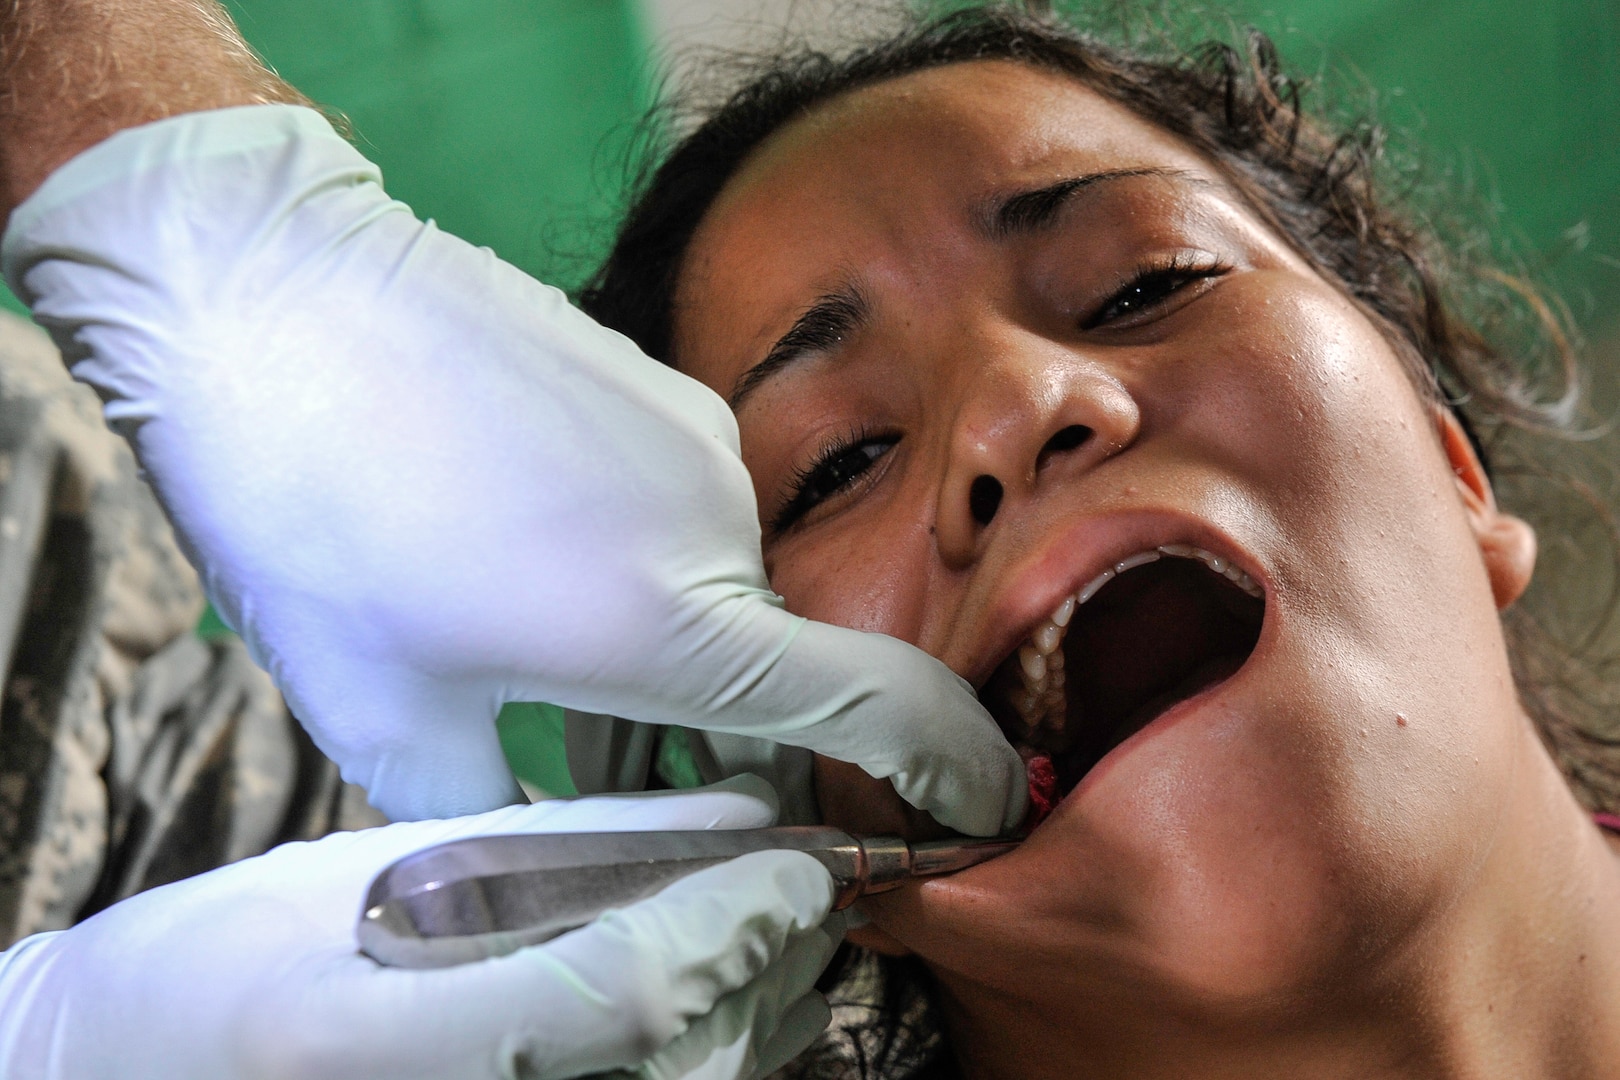 An adolescent girl has a wisdom tooth pulled by U.S. Army Maj. (Dr.) David Bennett, Joint Task Force-Bravo Medical Element dentist, during a Medical Readiness Training Exercise operation in Trujillo, Honduras, July 29, 2016. During this two-day MEDRETE, the dental section treated more than 200 patients. (U.S. Air Force photo by Staff Sgt. Siuta B. Ika)